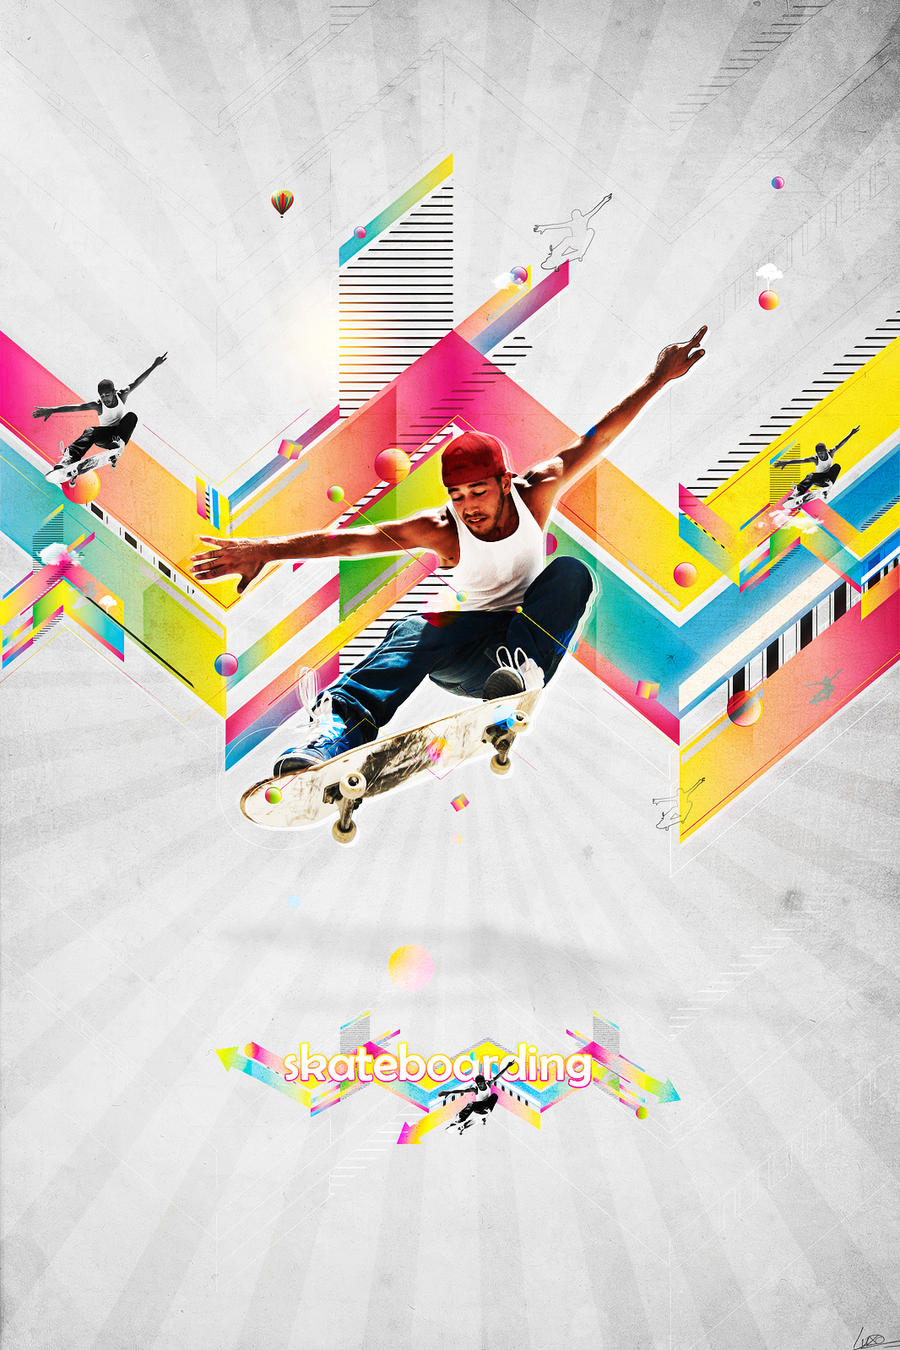 Skating out of colours